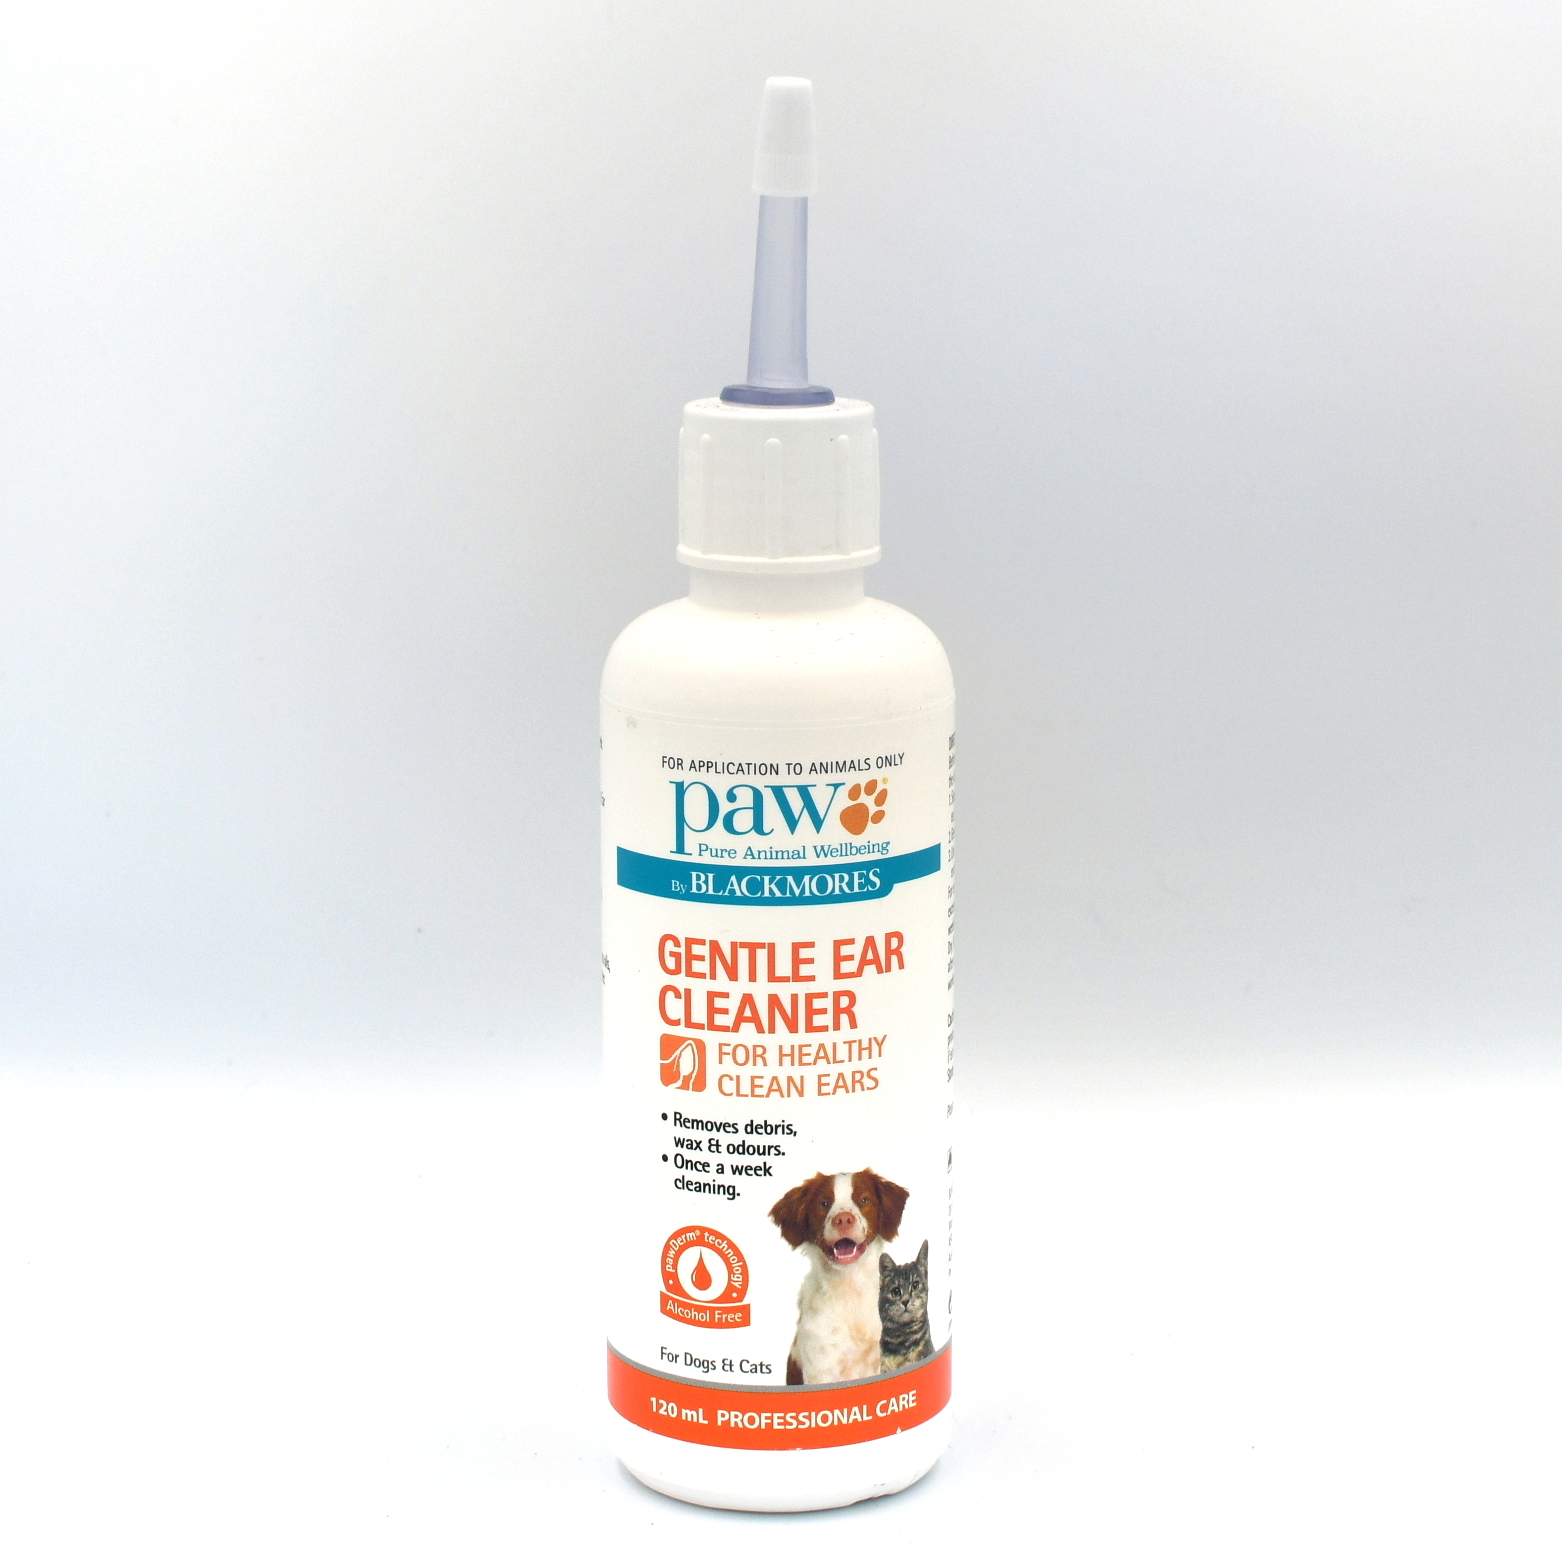 paw gentle ear cleaner review